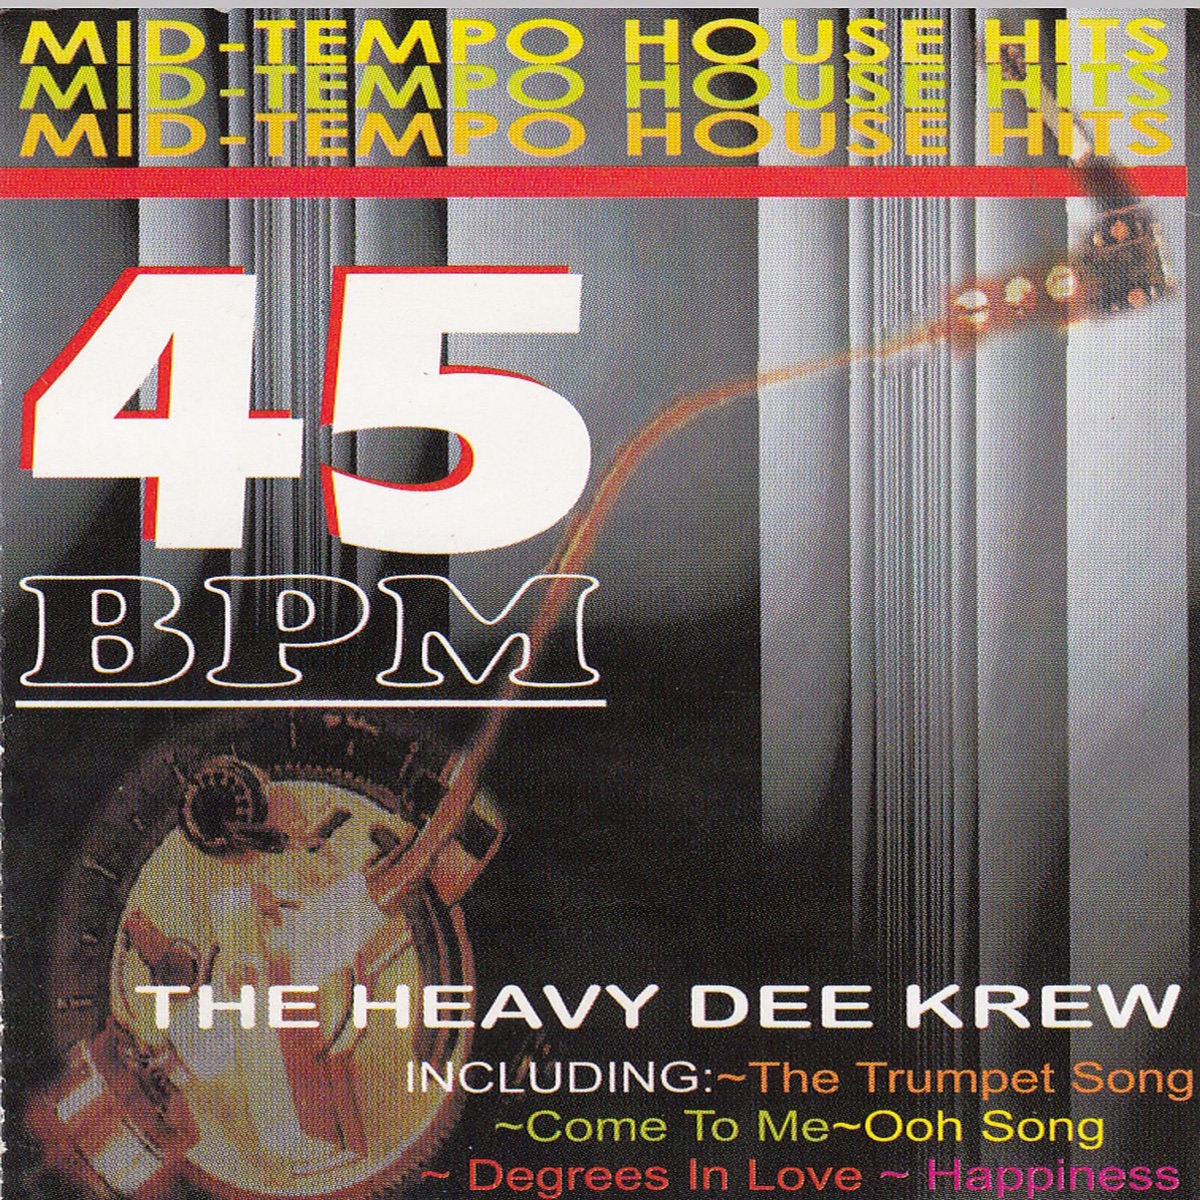 45 BPM Vol. 2 (Mid-Tempo House Hits, The Shoot Out) (feat. DJ Lu) by The  Heavy Dee krew on Apple Music